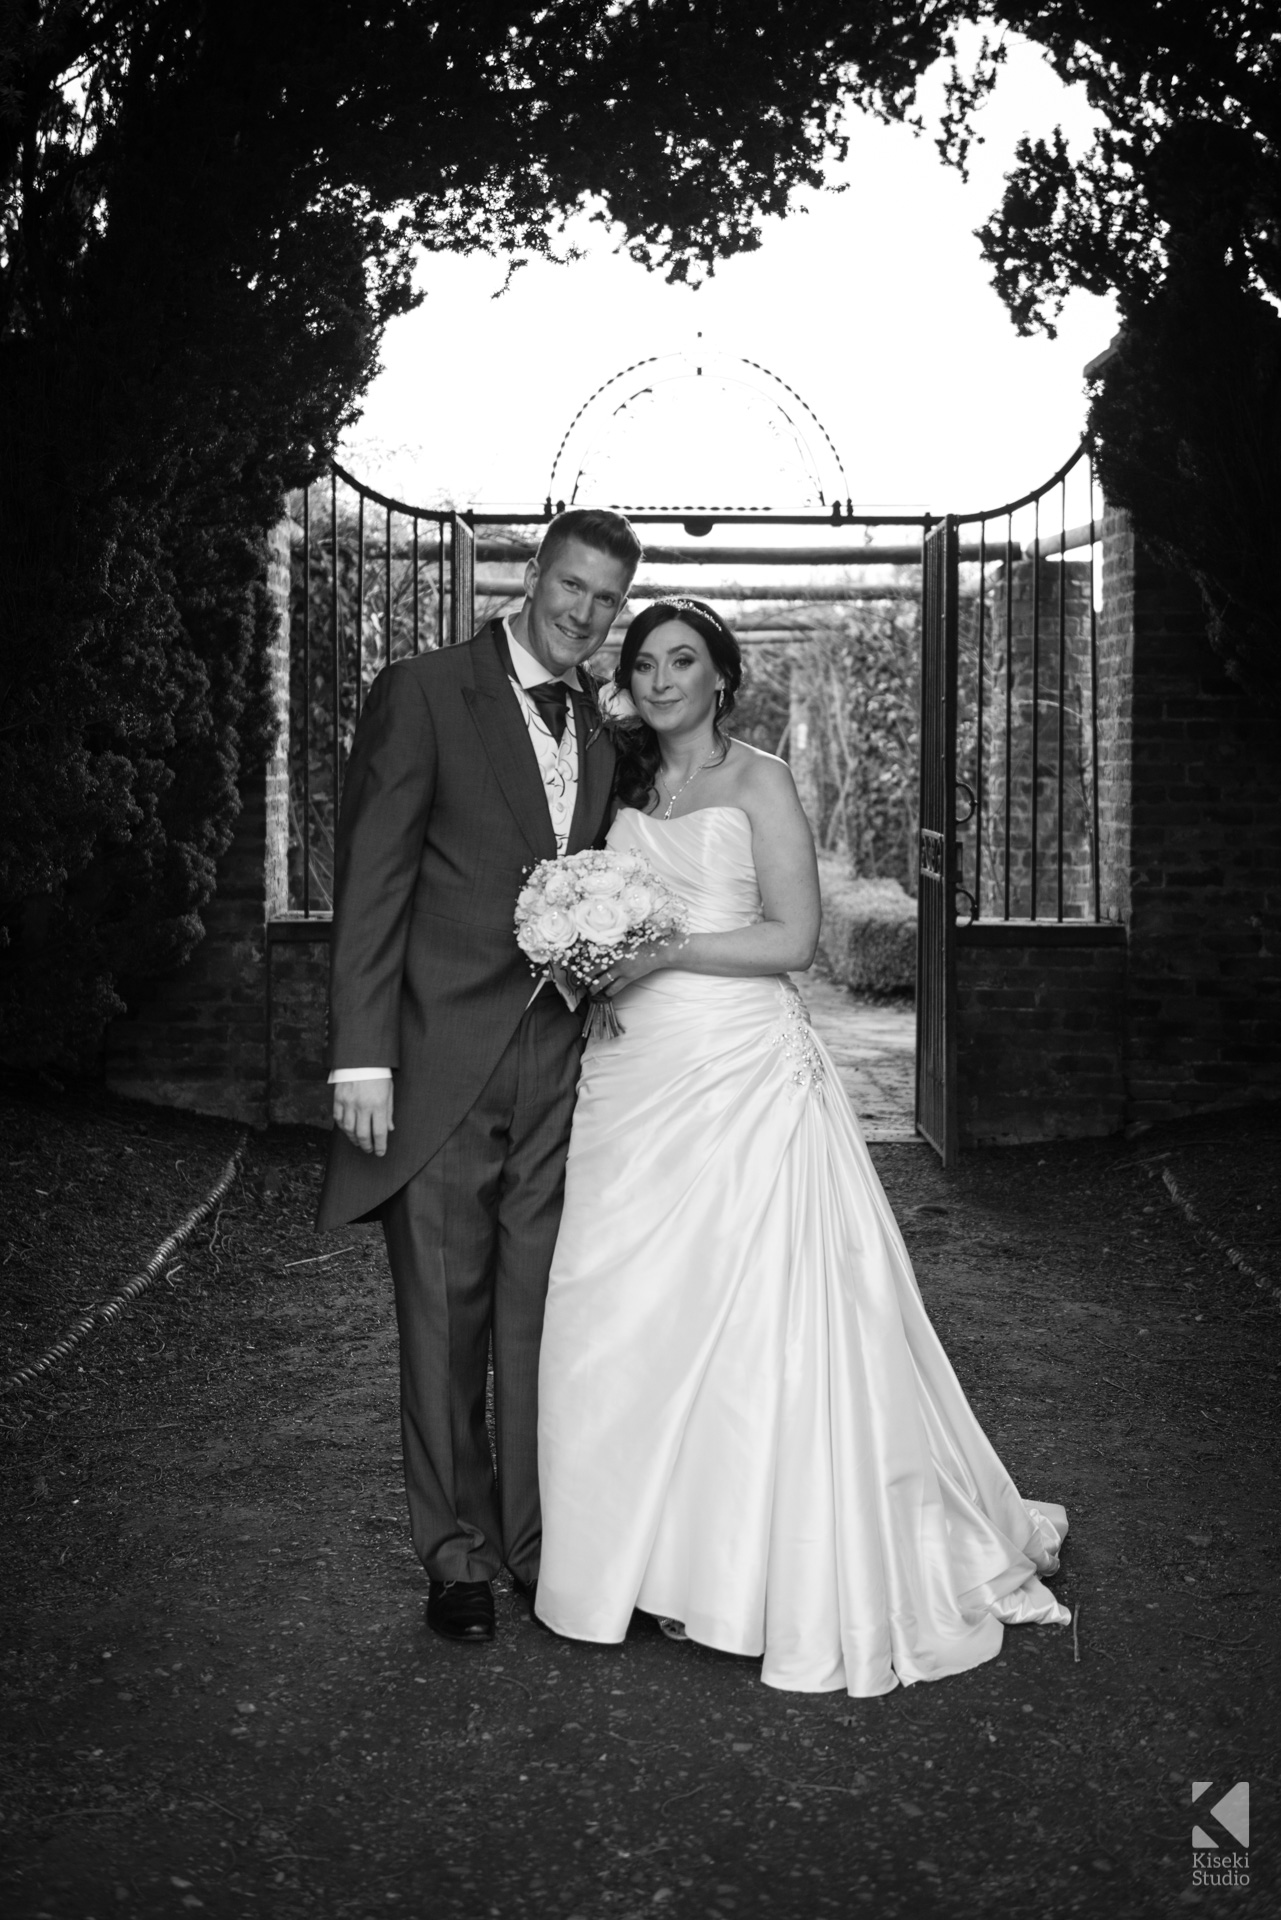 Ripley Castle Wedding - Bride and Groom outside in the grounds